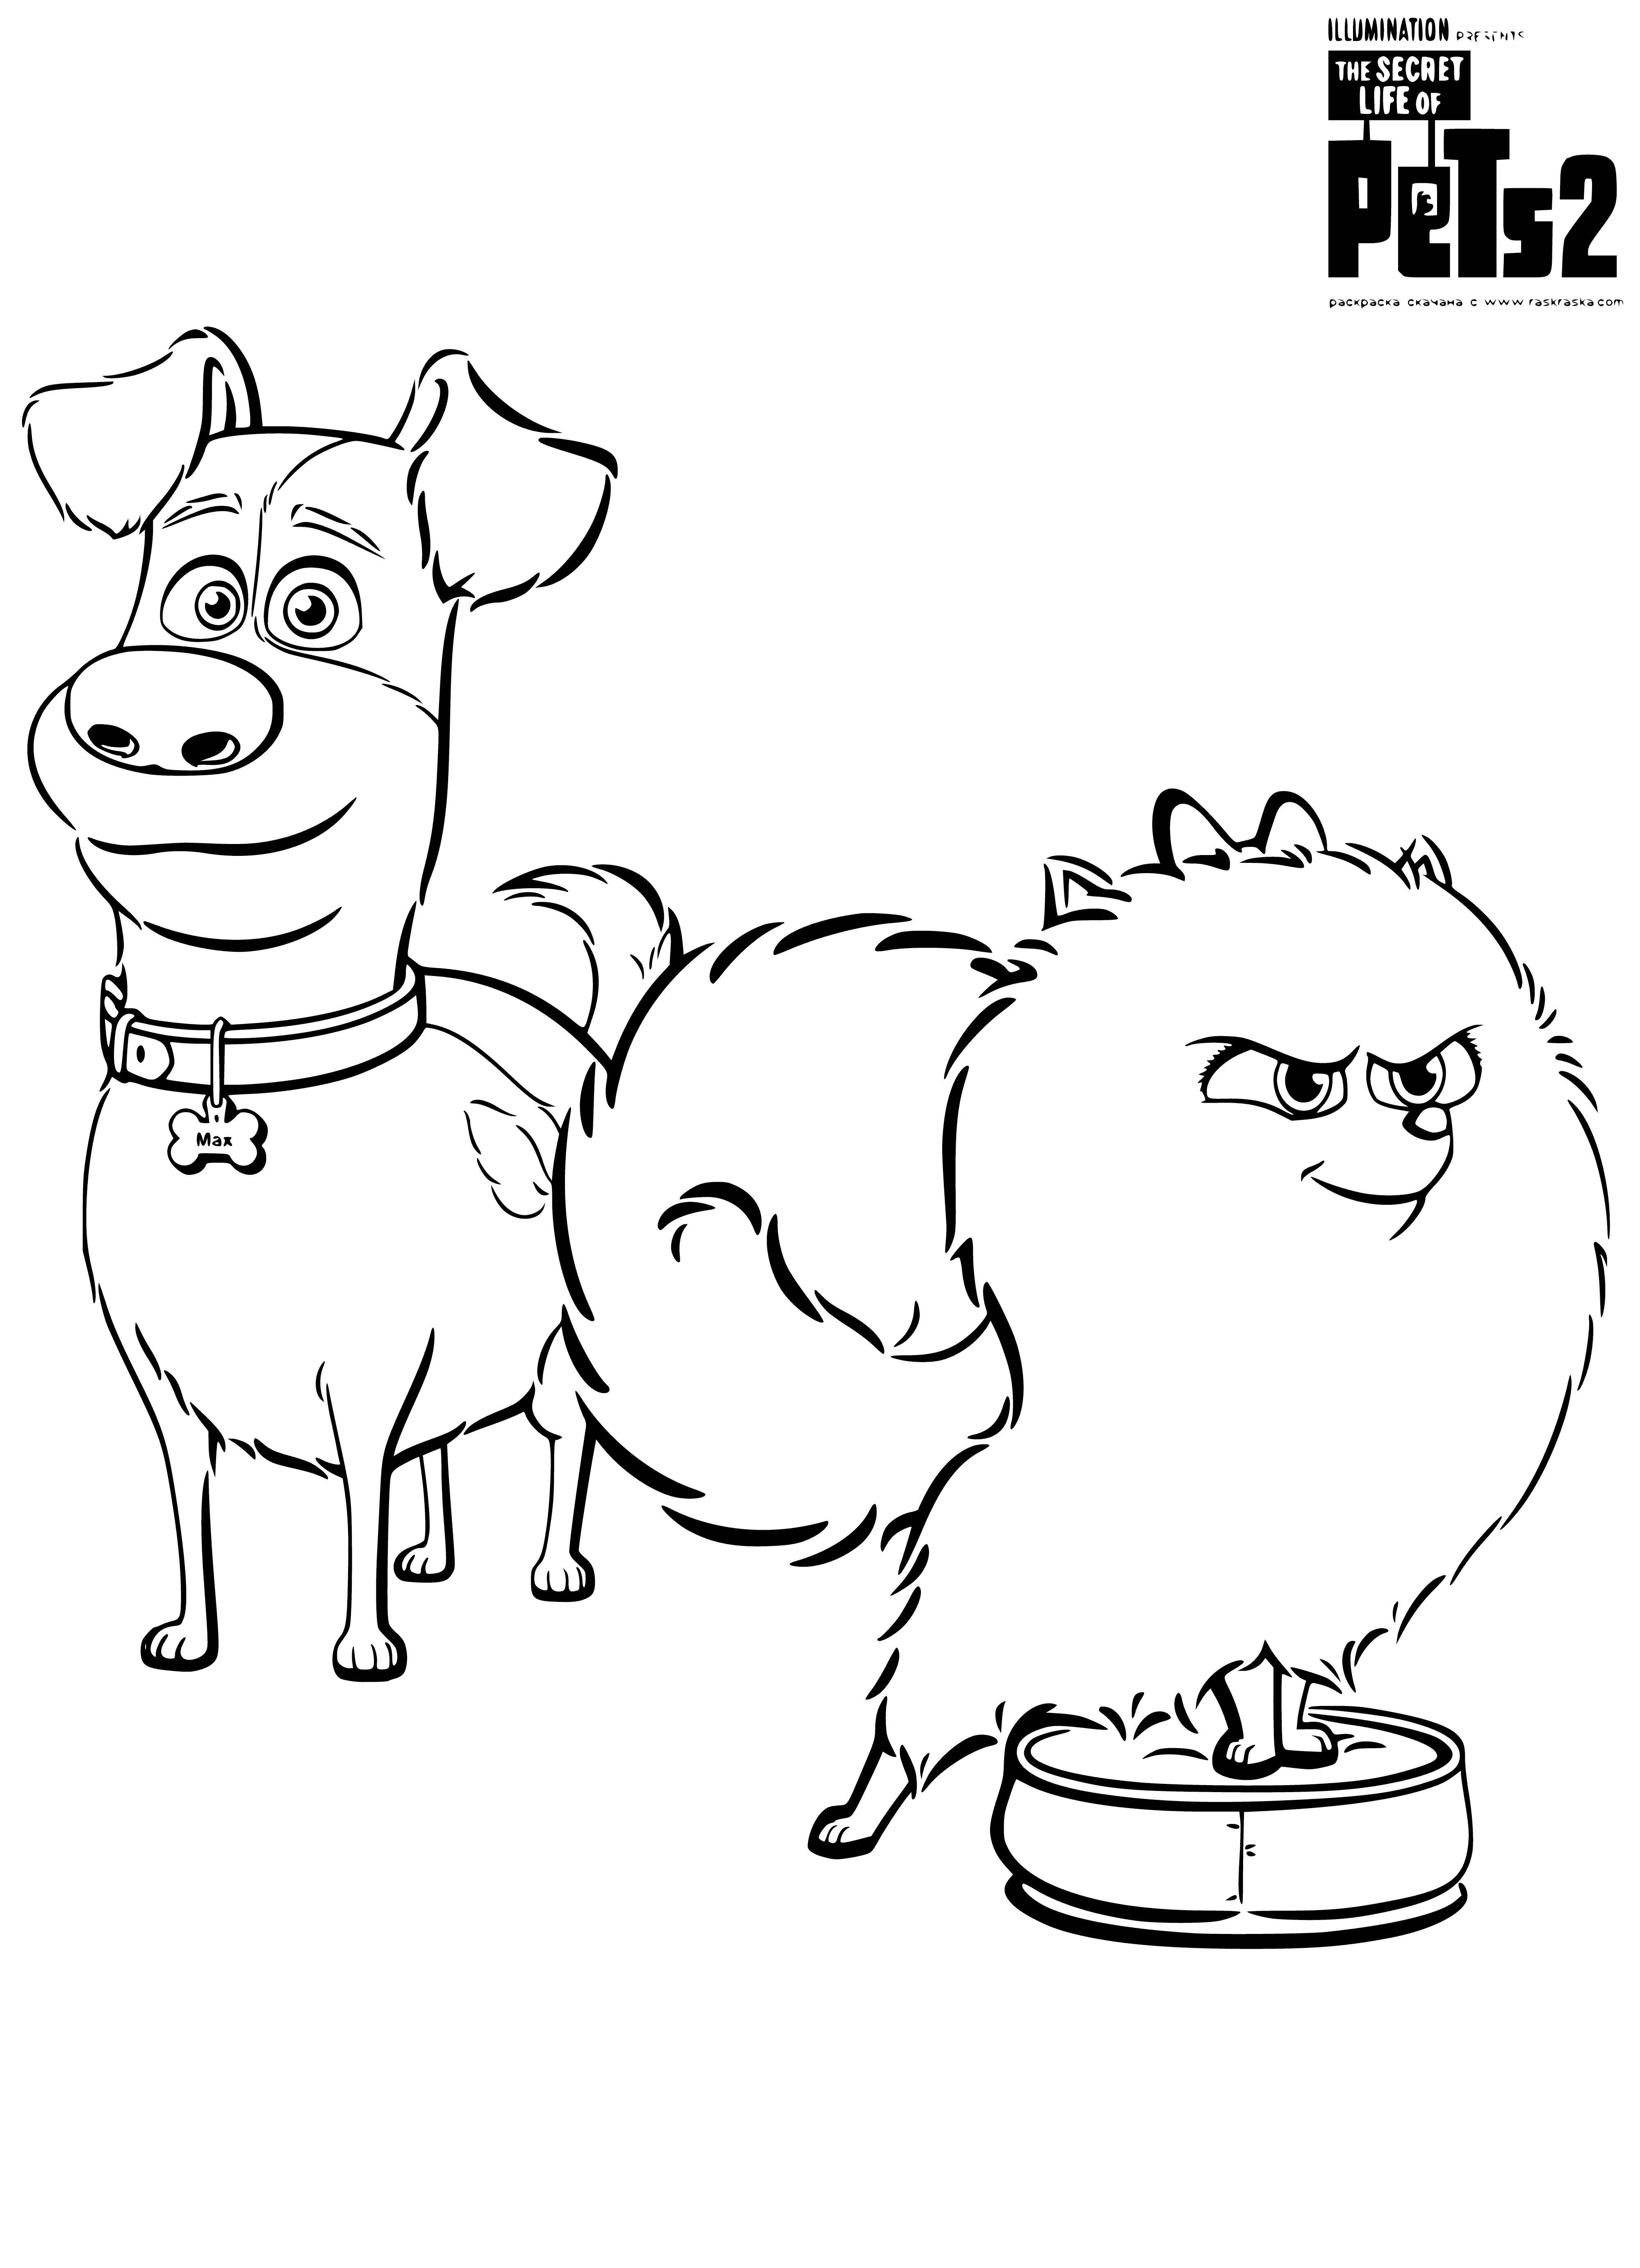 coloring page: Two happy dogs, Max & Gidget, stand & sit surrounded by trees & flowers. Max is by a picket fence & both have their tongues out ready for fun!